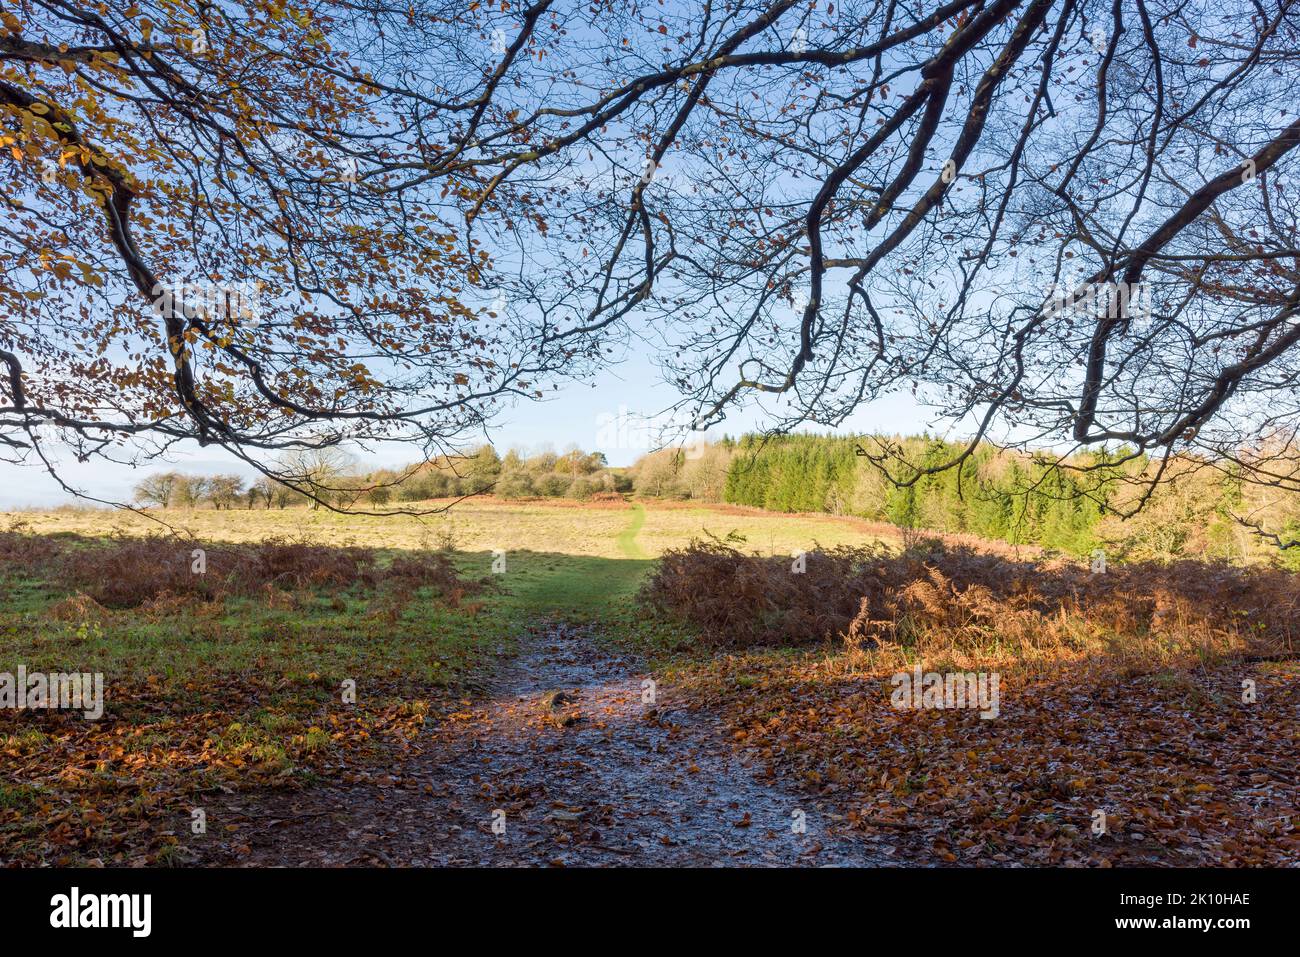 A bridleway on Dolebury Warren in late autumn in the Mendip Hills Area of Outstanding Natural Beauty, North Somerset, England. Stock Photo